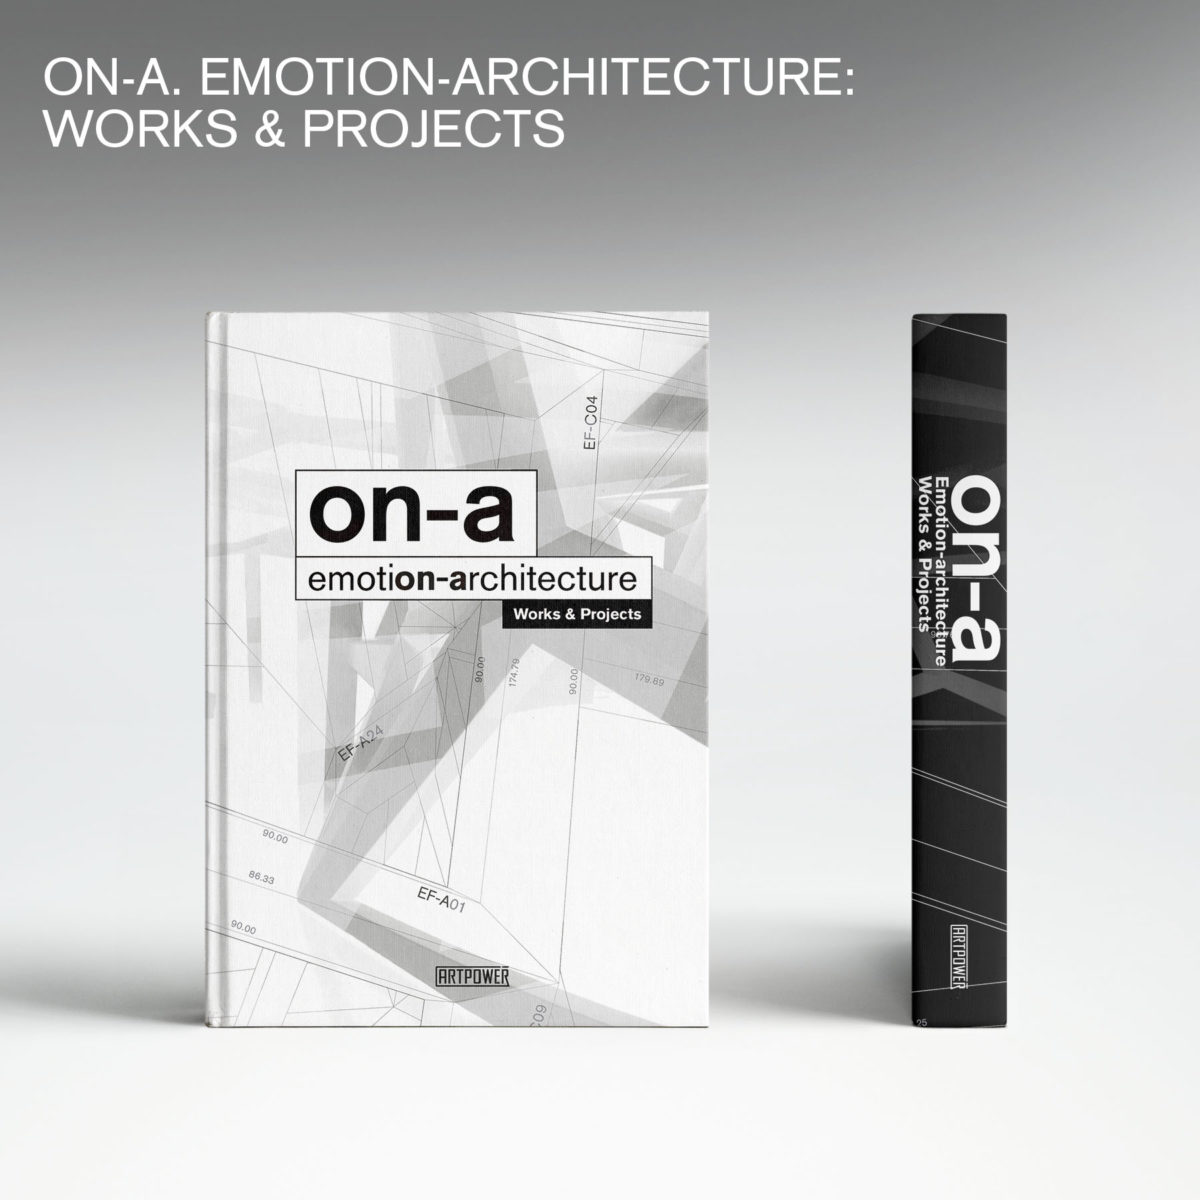 ON-A. EMOTION-ARCHITECTURE: WORKS & PROJECTS